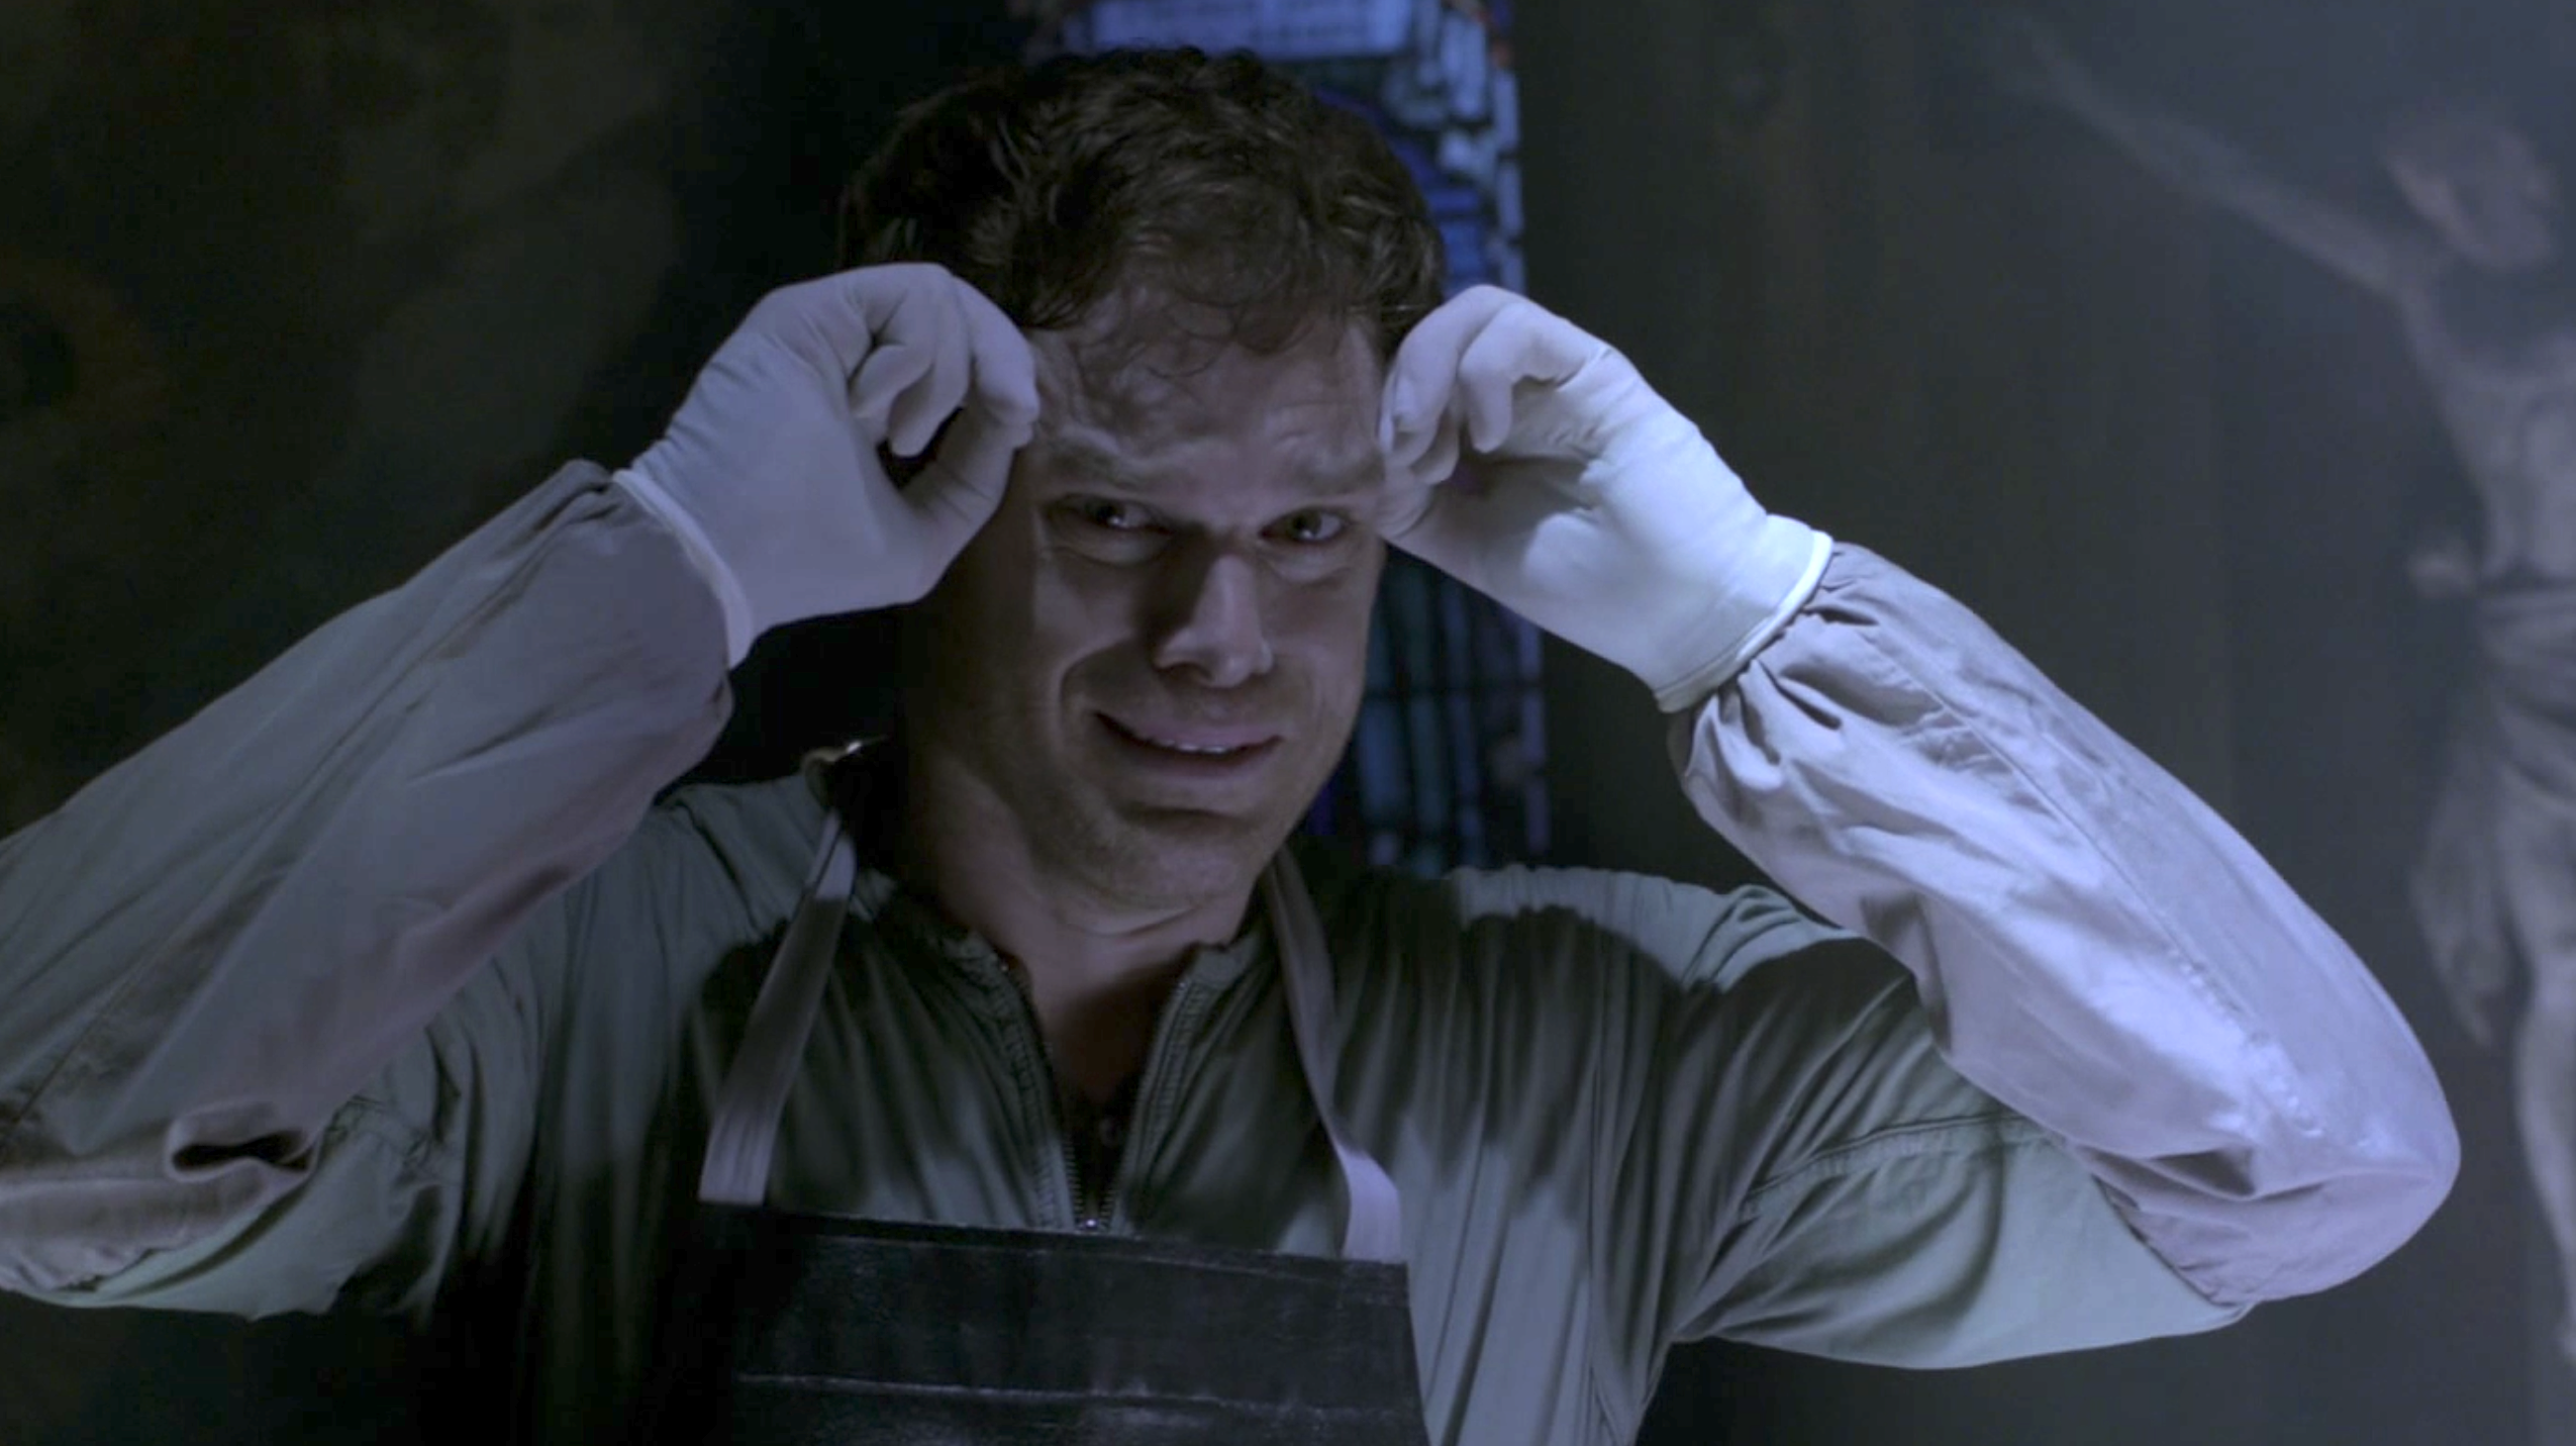 They can’t all be killer: In defense of Dexter’s final seasons